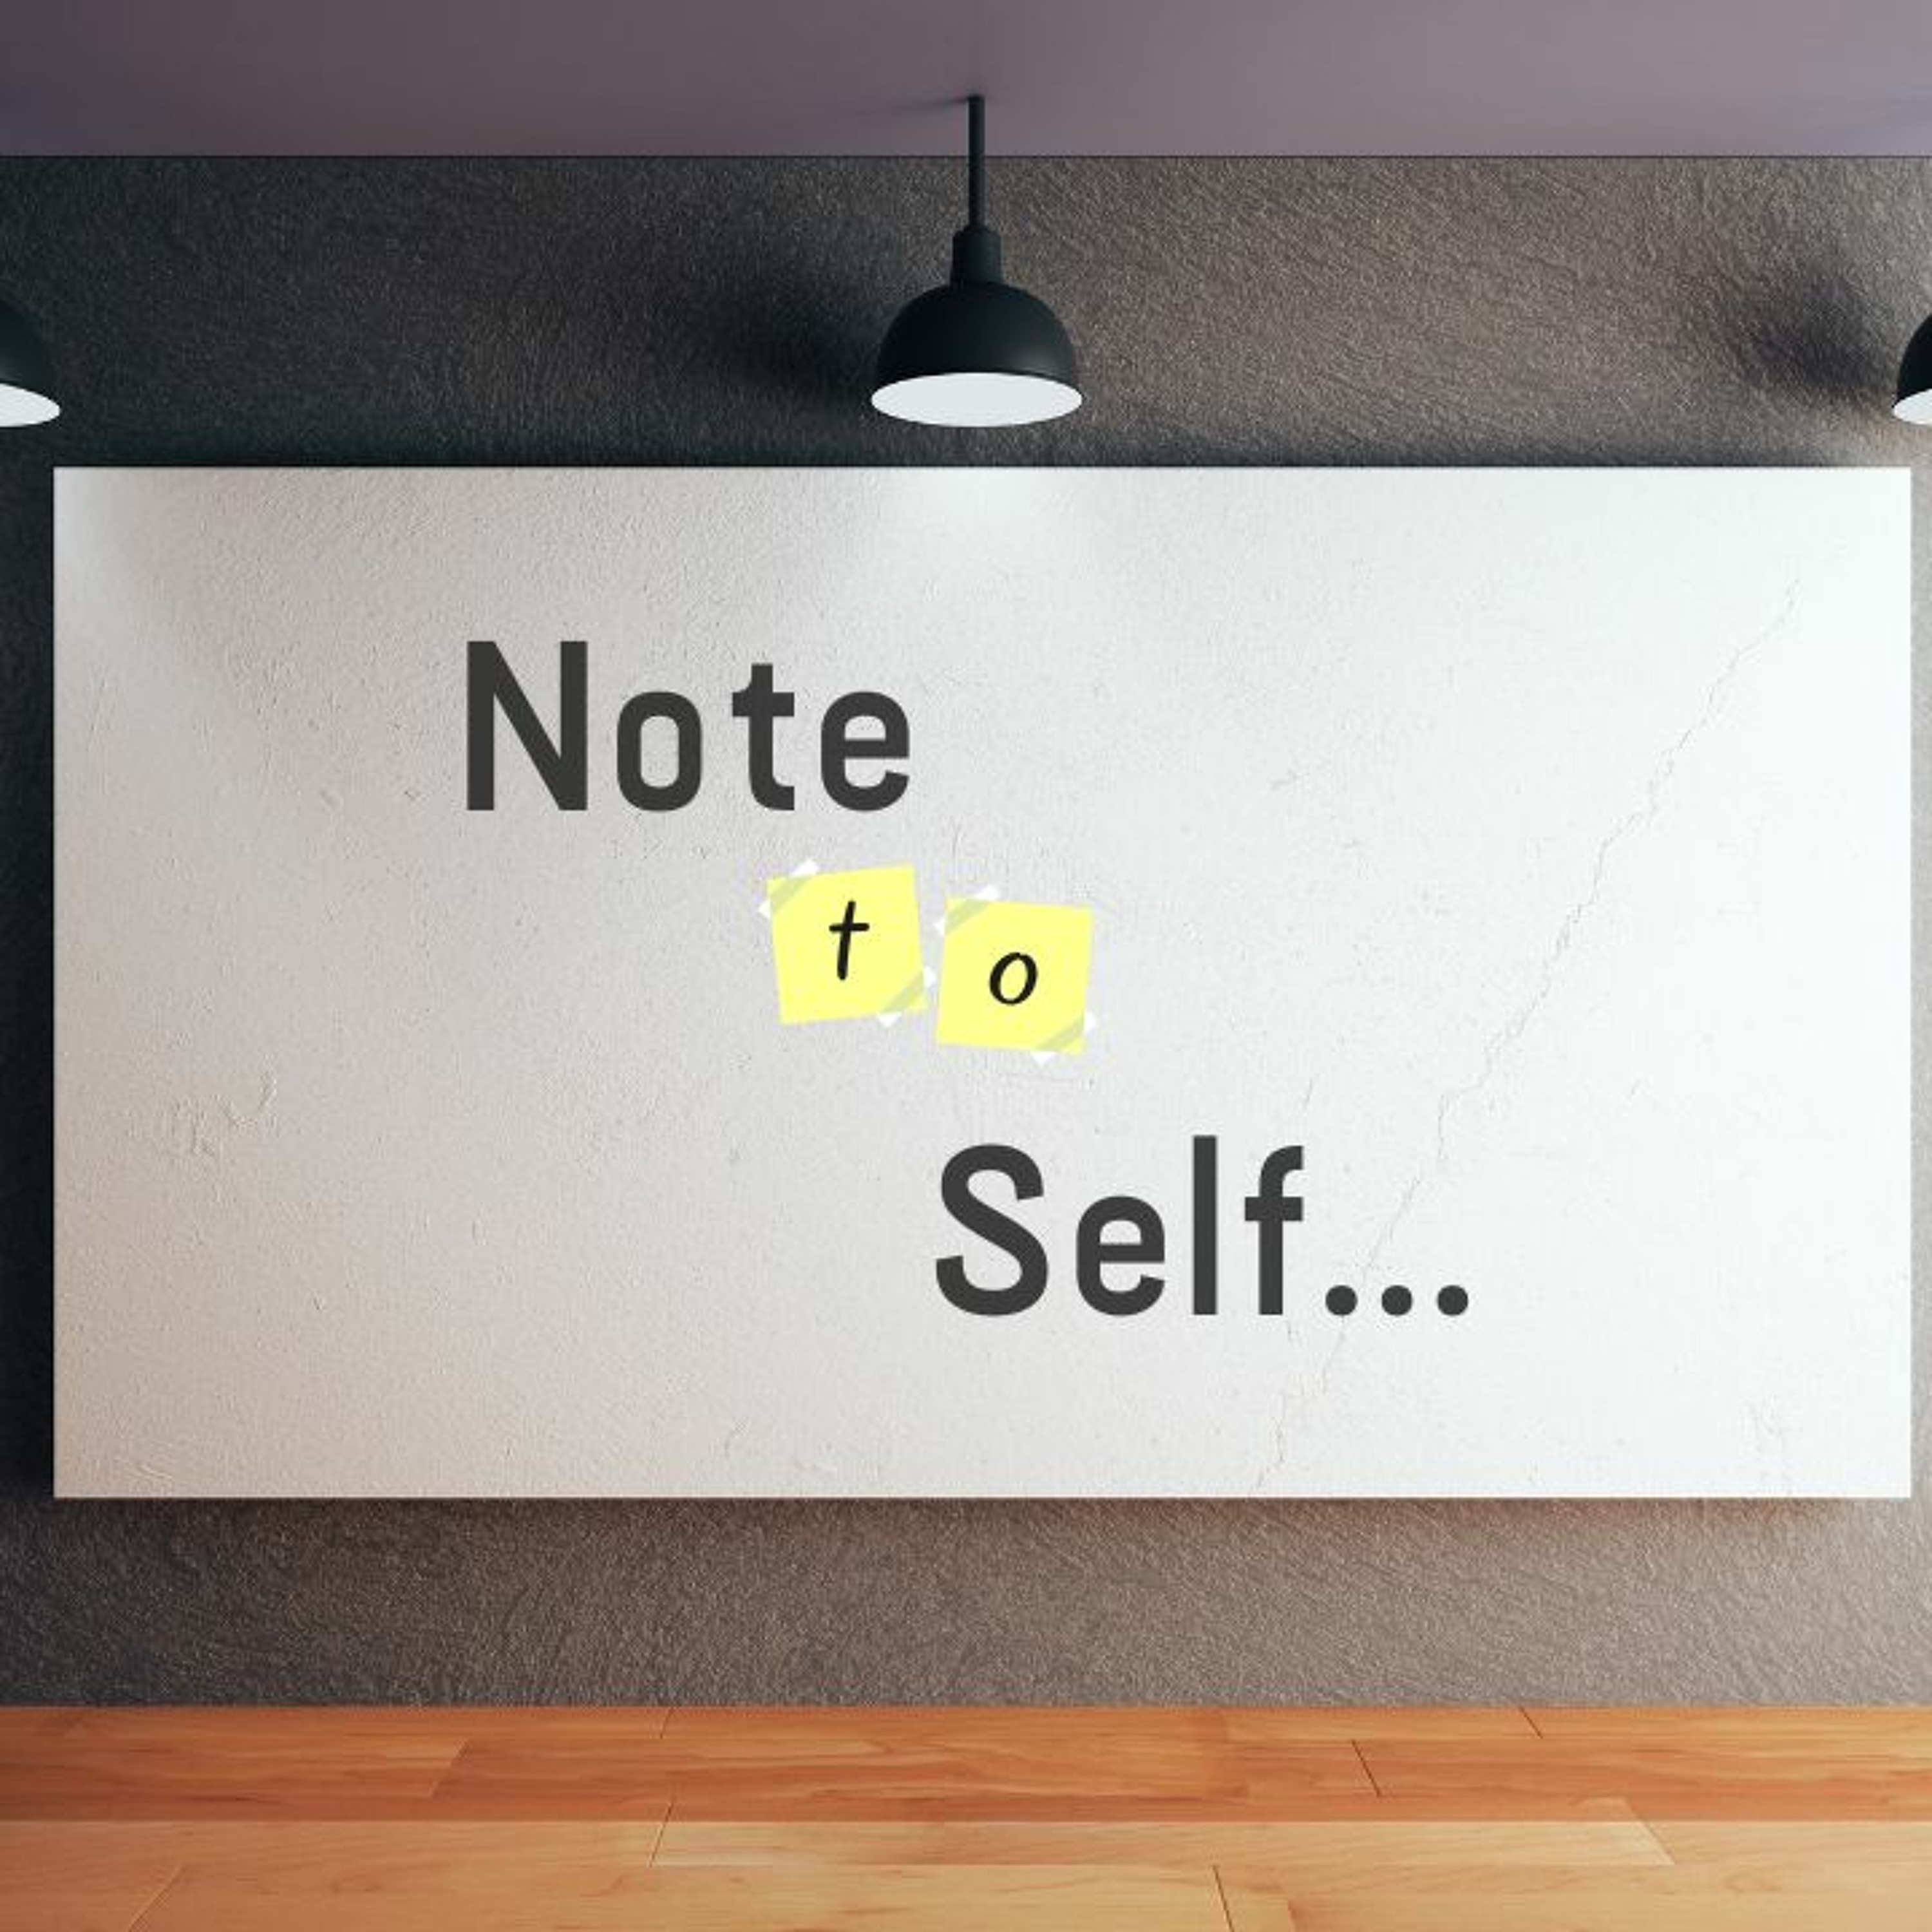 Our Flawed Life Formula :: Note to Self Pt. 1